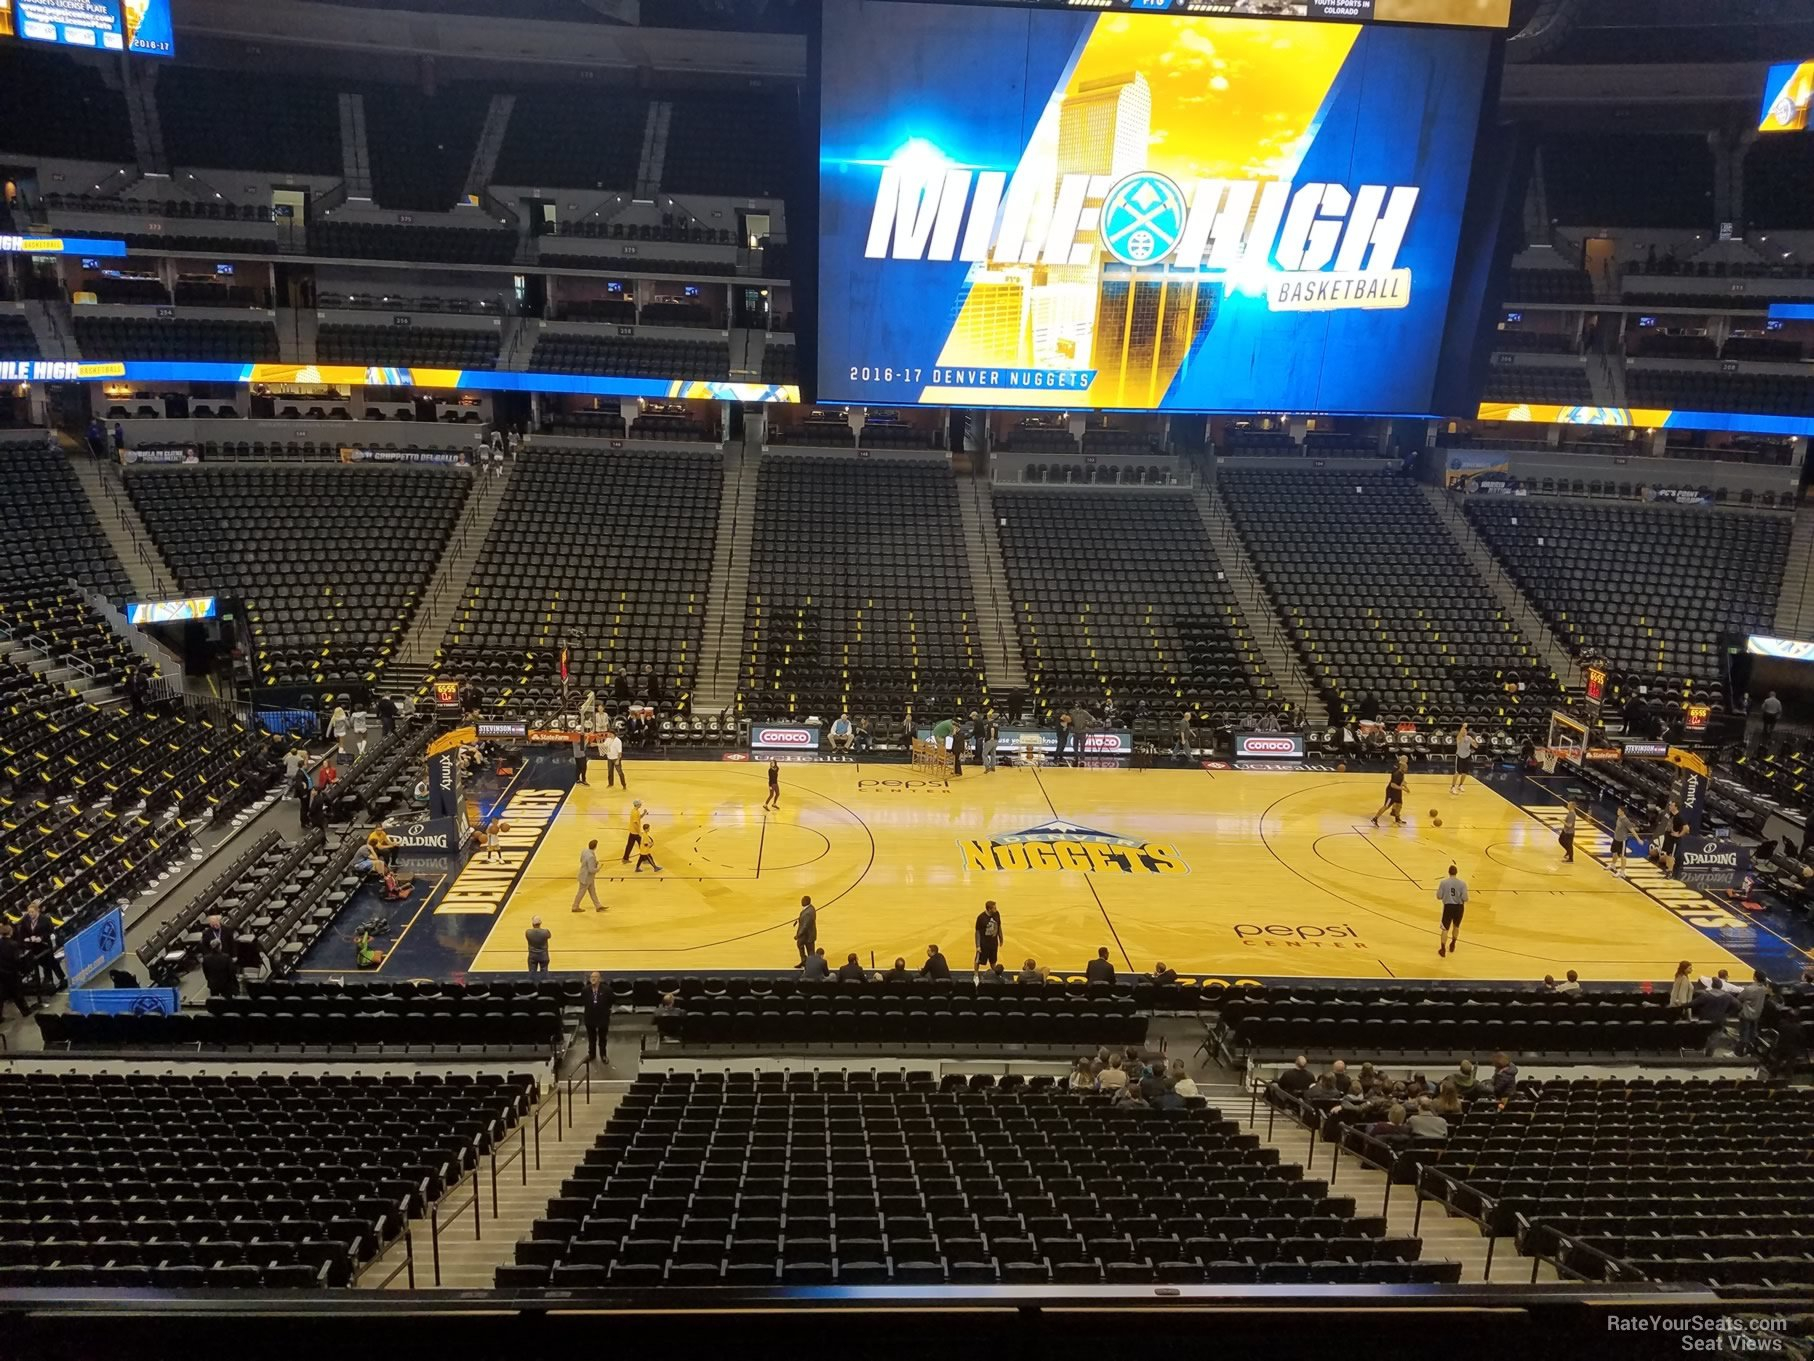 Section 232 At Ball Arena Denver Nuggets RateYourSeats